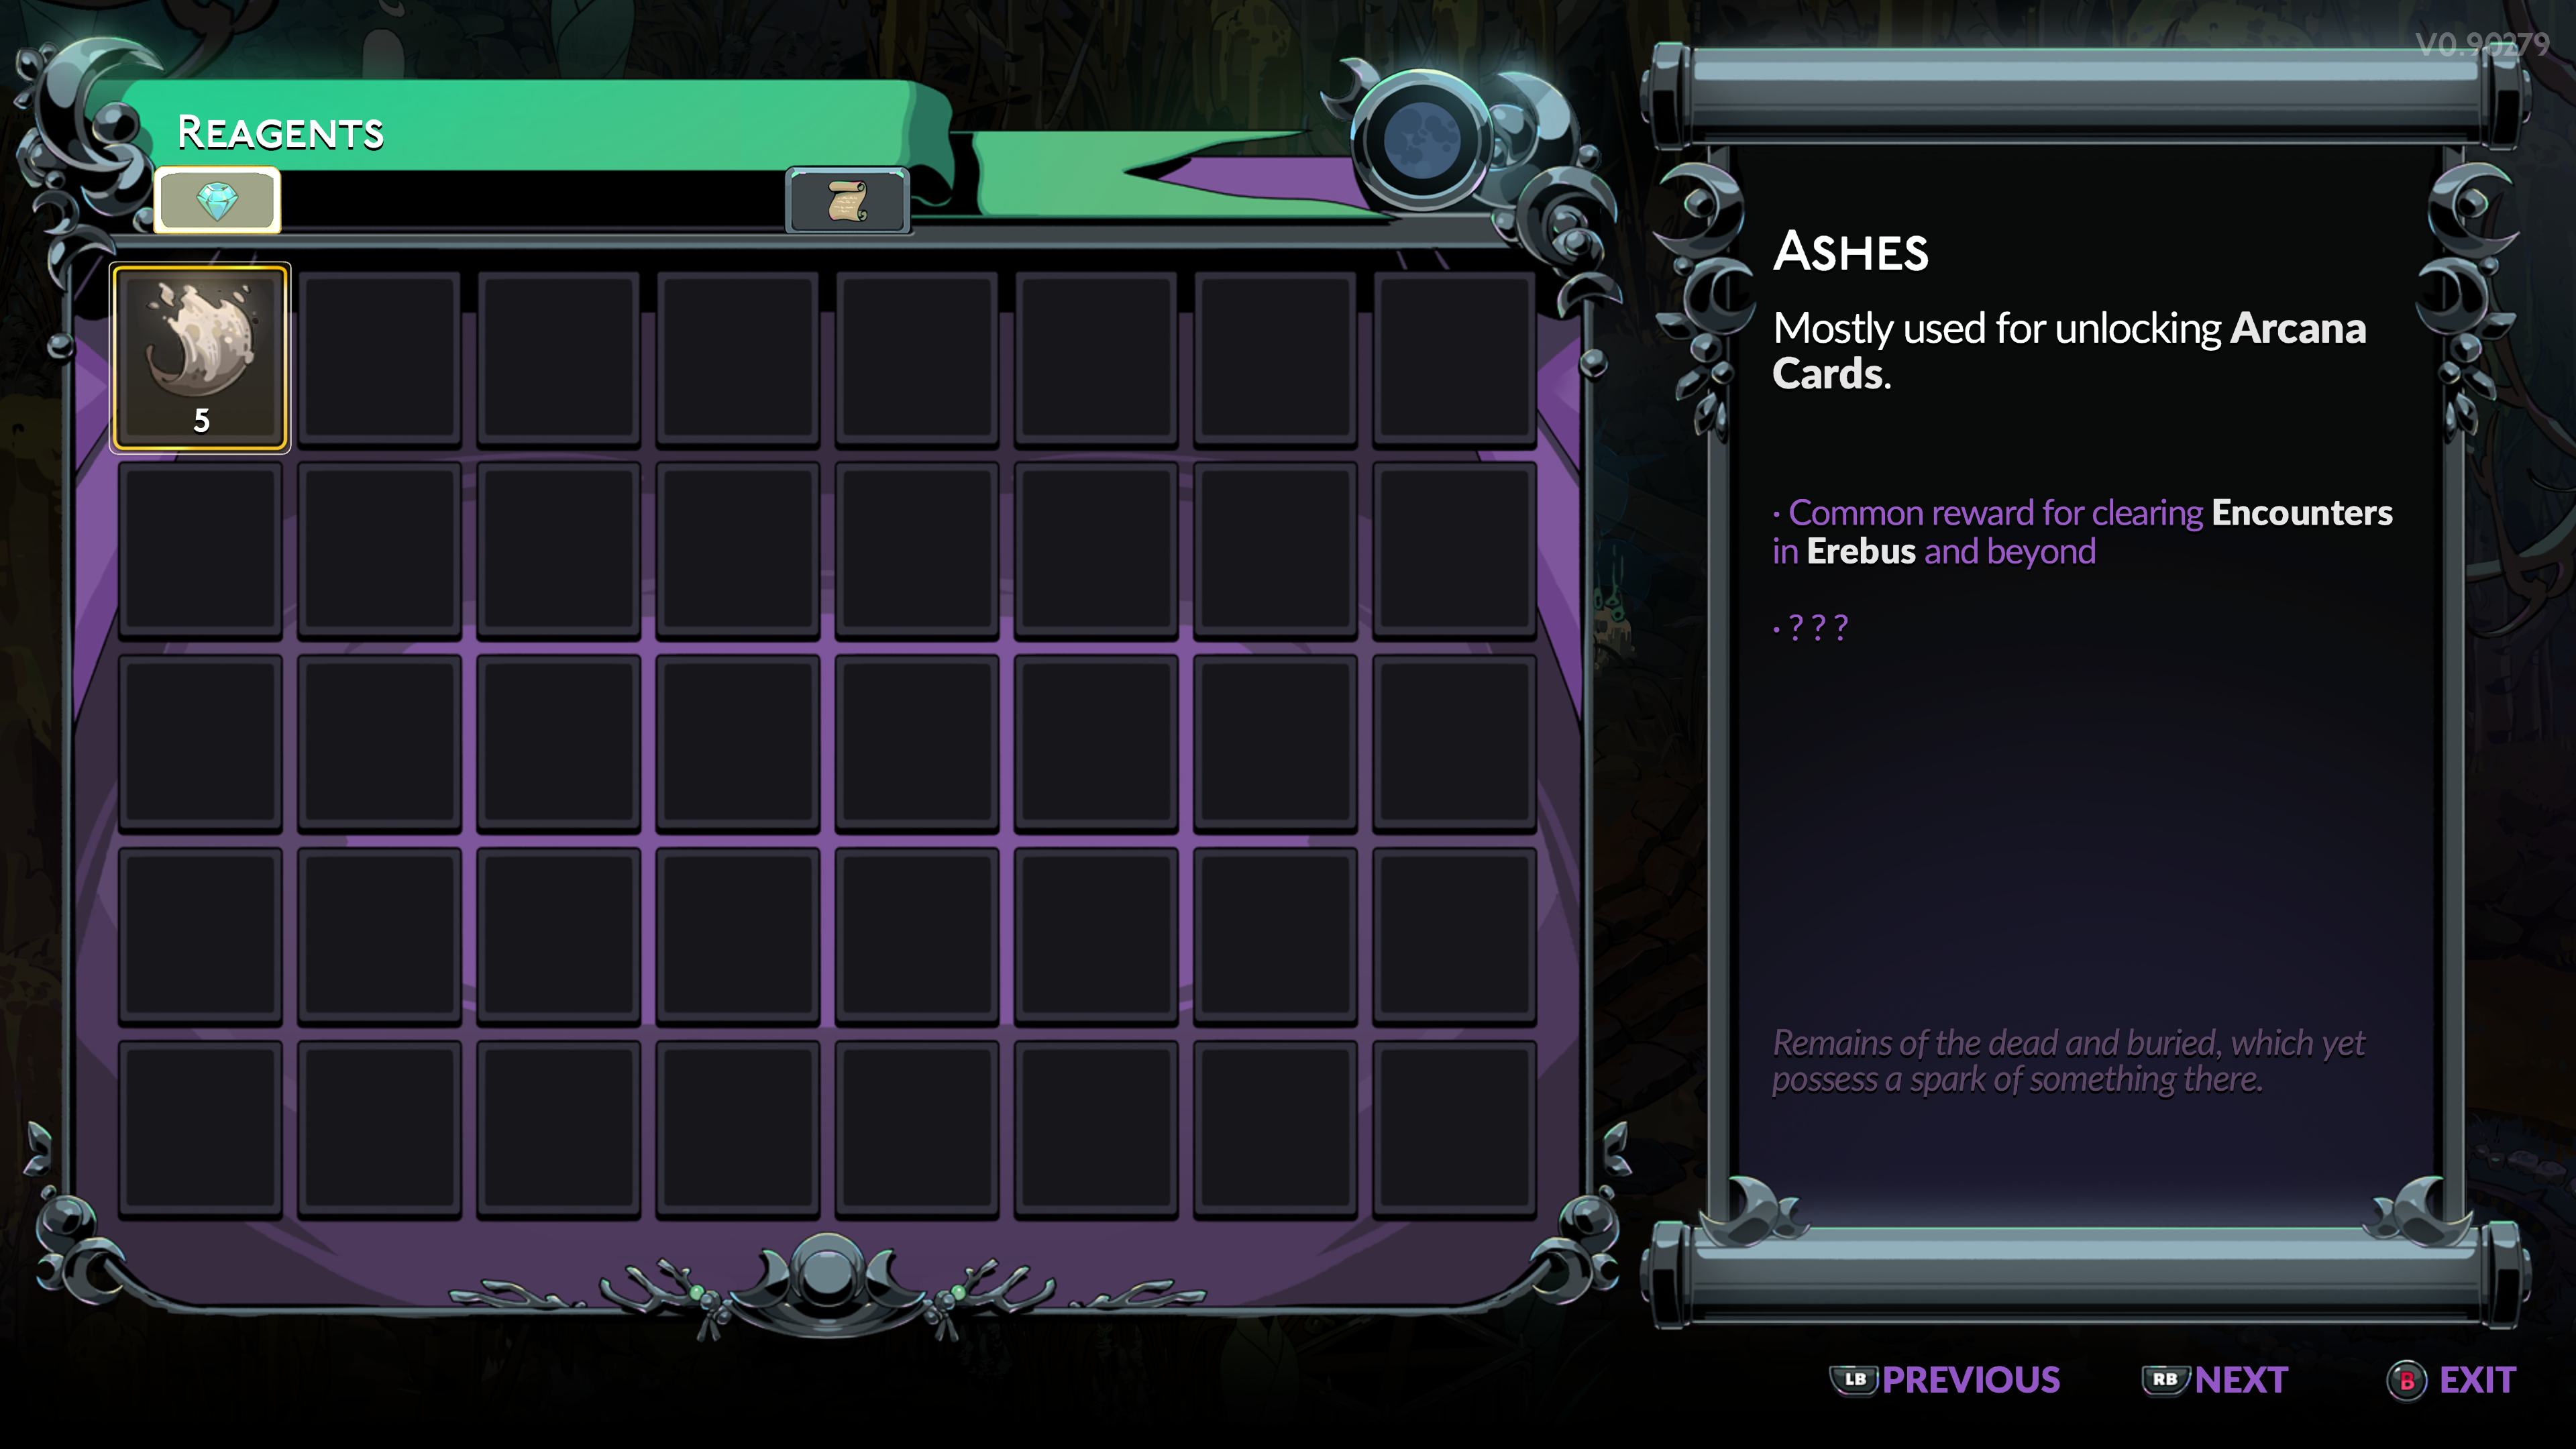 Hades 2 screenshot of the reagent menu with ashes